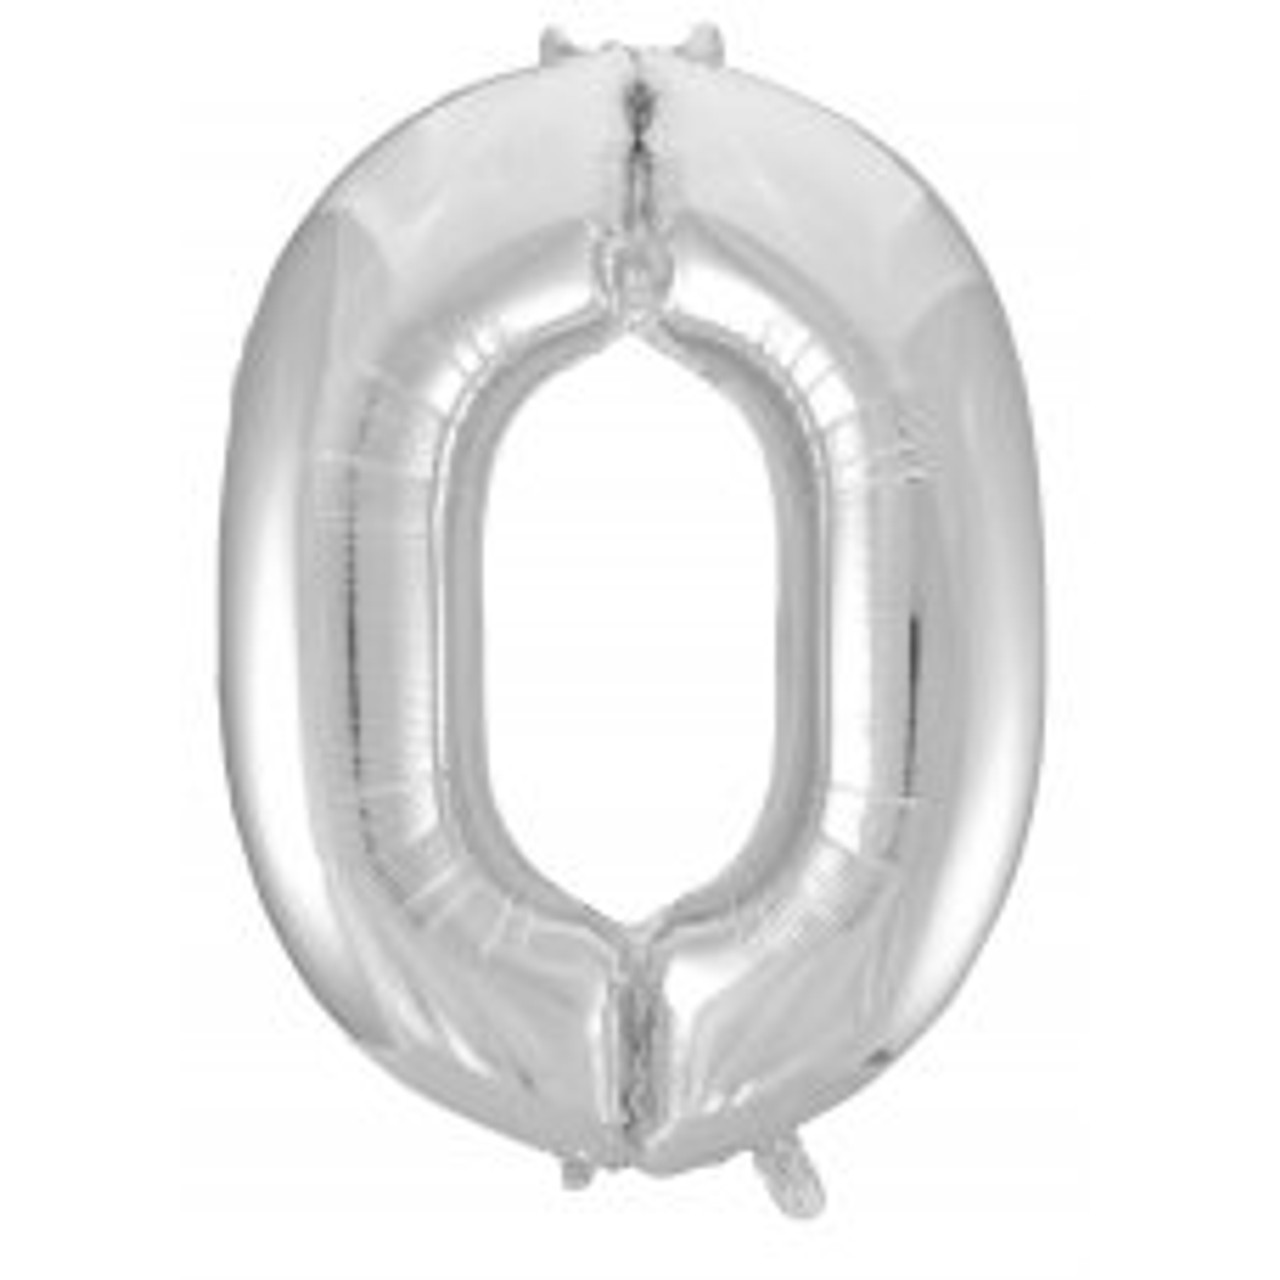 213700 0 NUMERAL SILVER FOIL BALLOON 87CM/34 INCH . INC HELIUM, WEIGHT, RIBBON